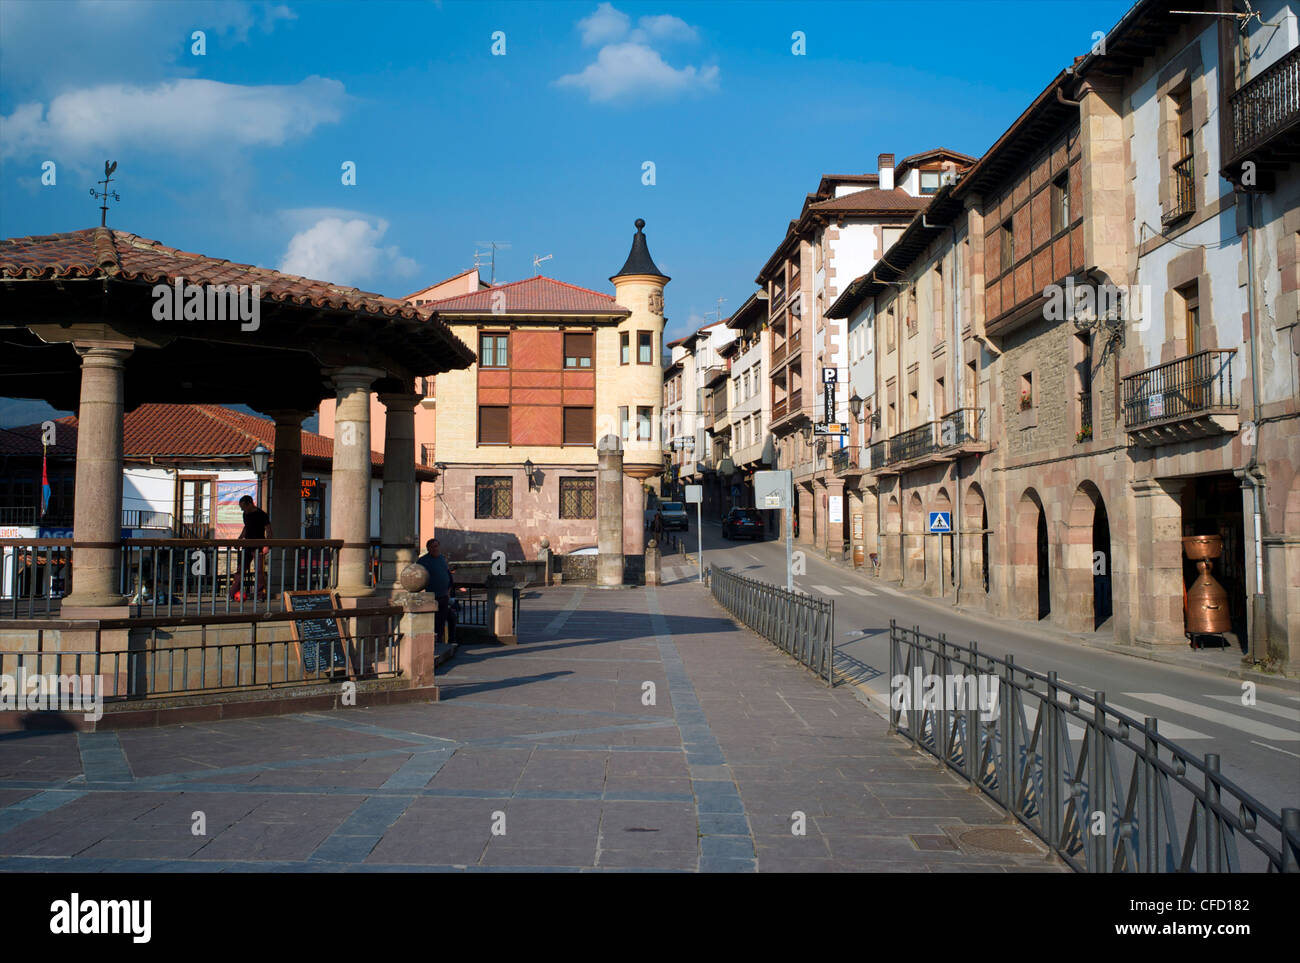 Potes, Cantabria, Spain, Europe Banque D'Images